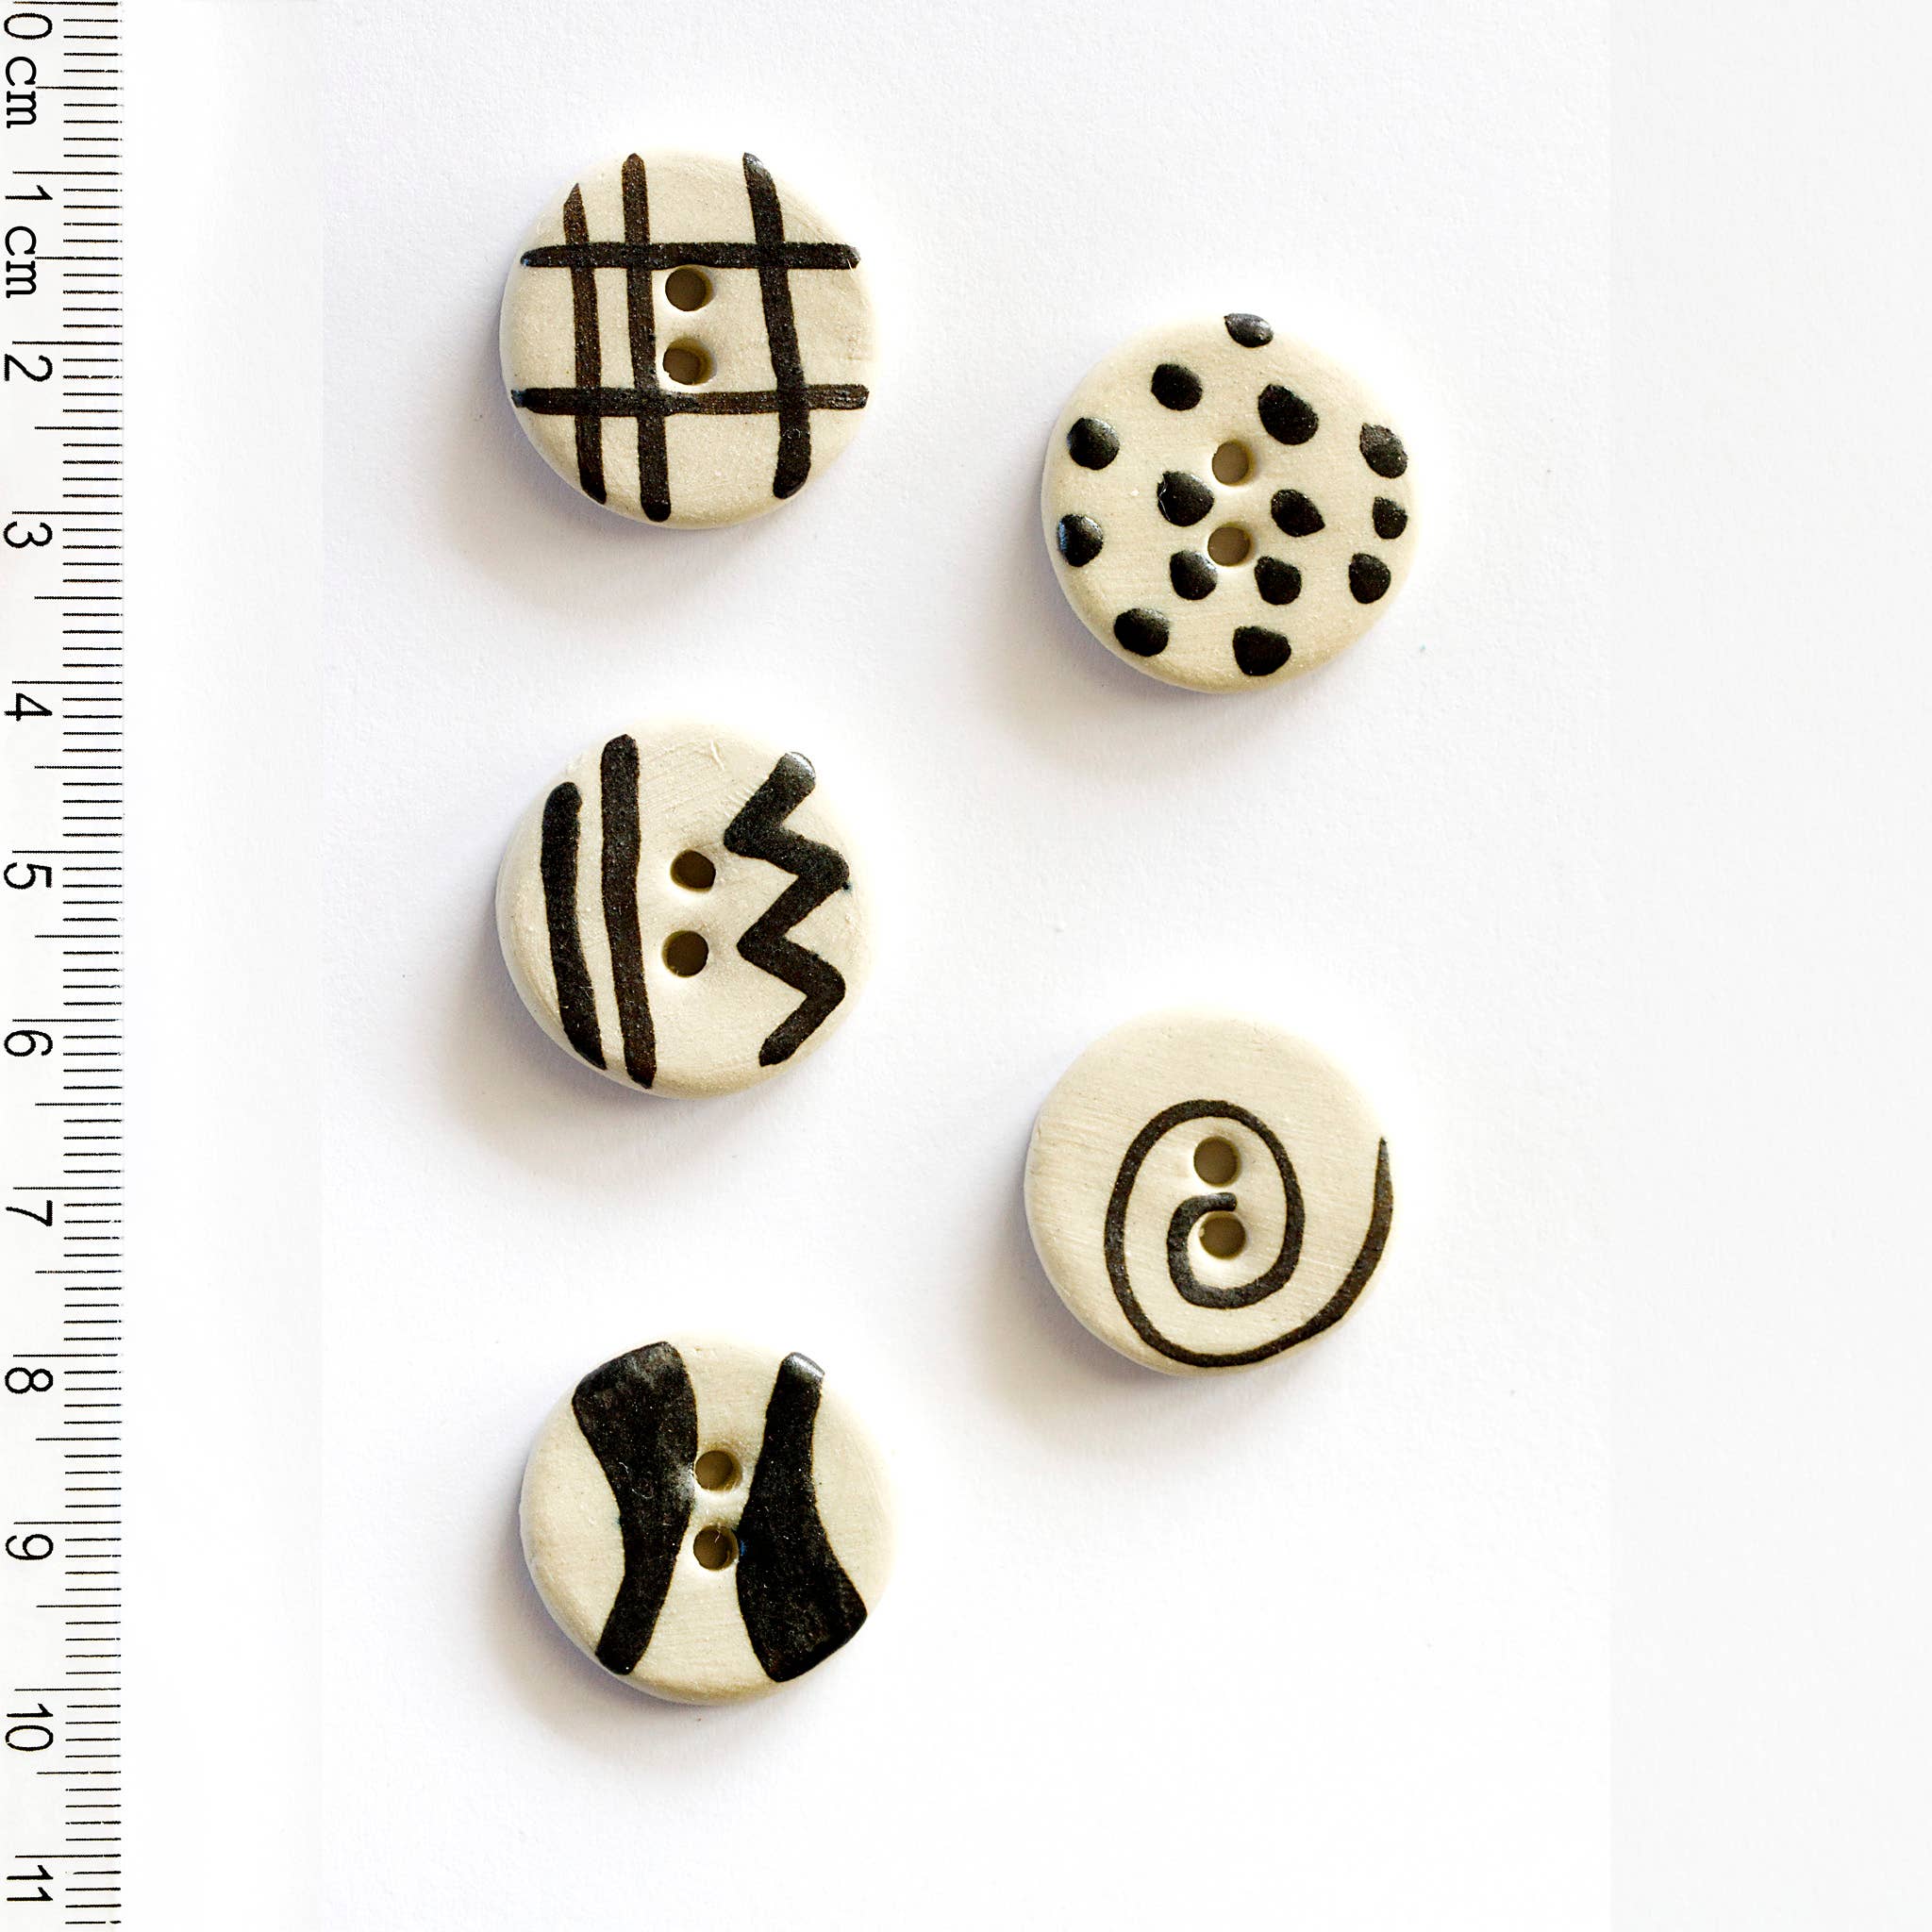 Incomparable Buttons - 5 Patterned Buttons